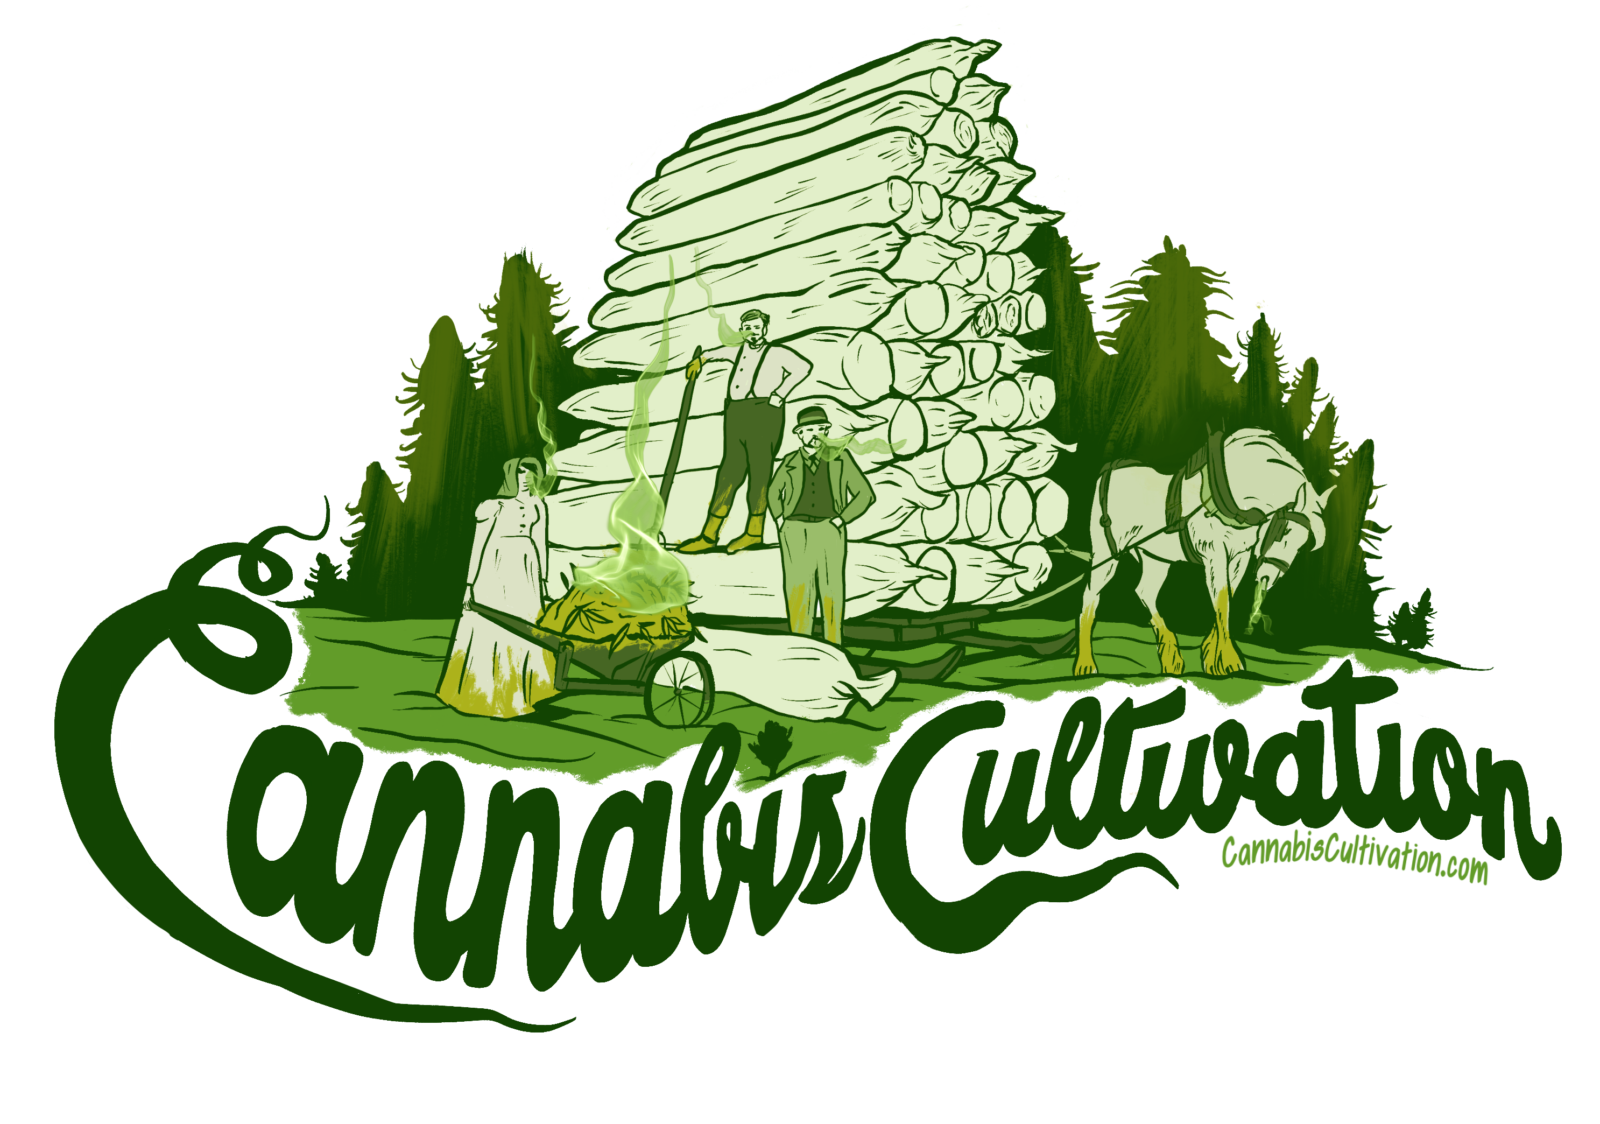 cannabiscultivation domain logo